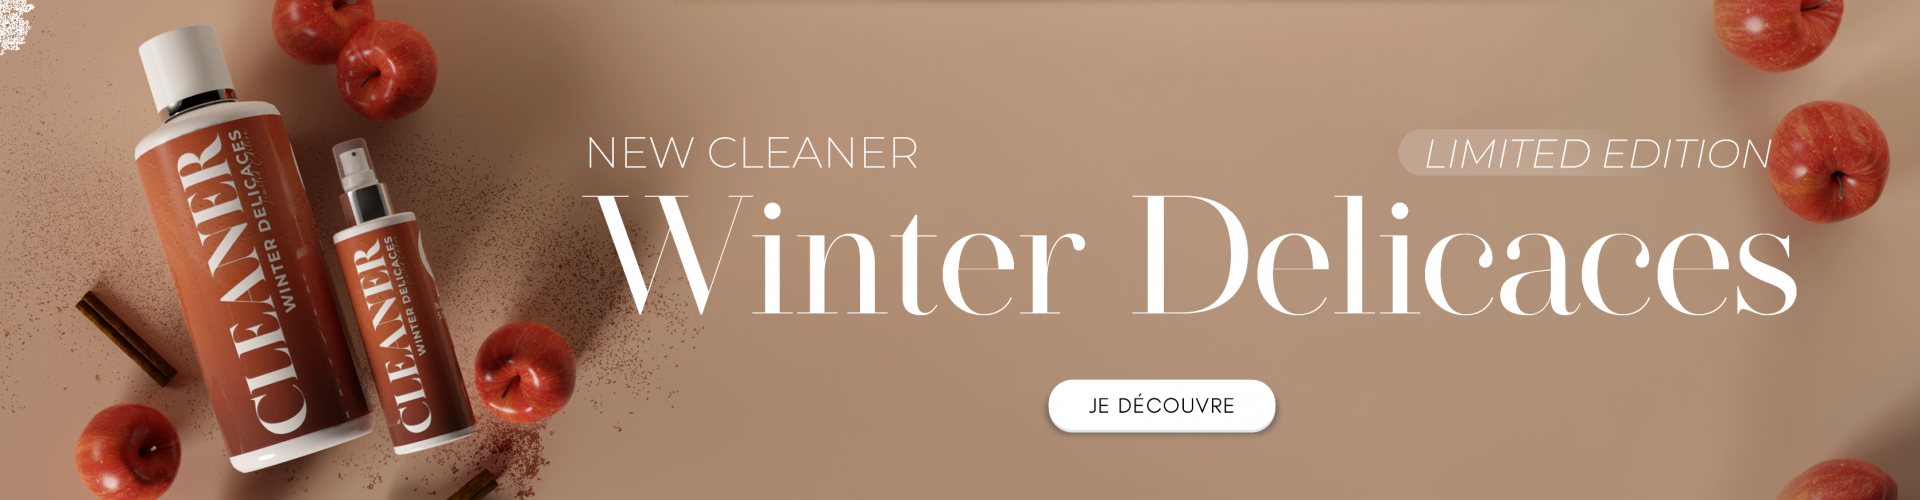 CLEANER WINTER DELICACES